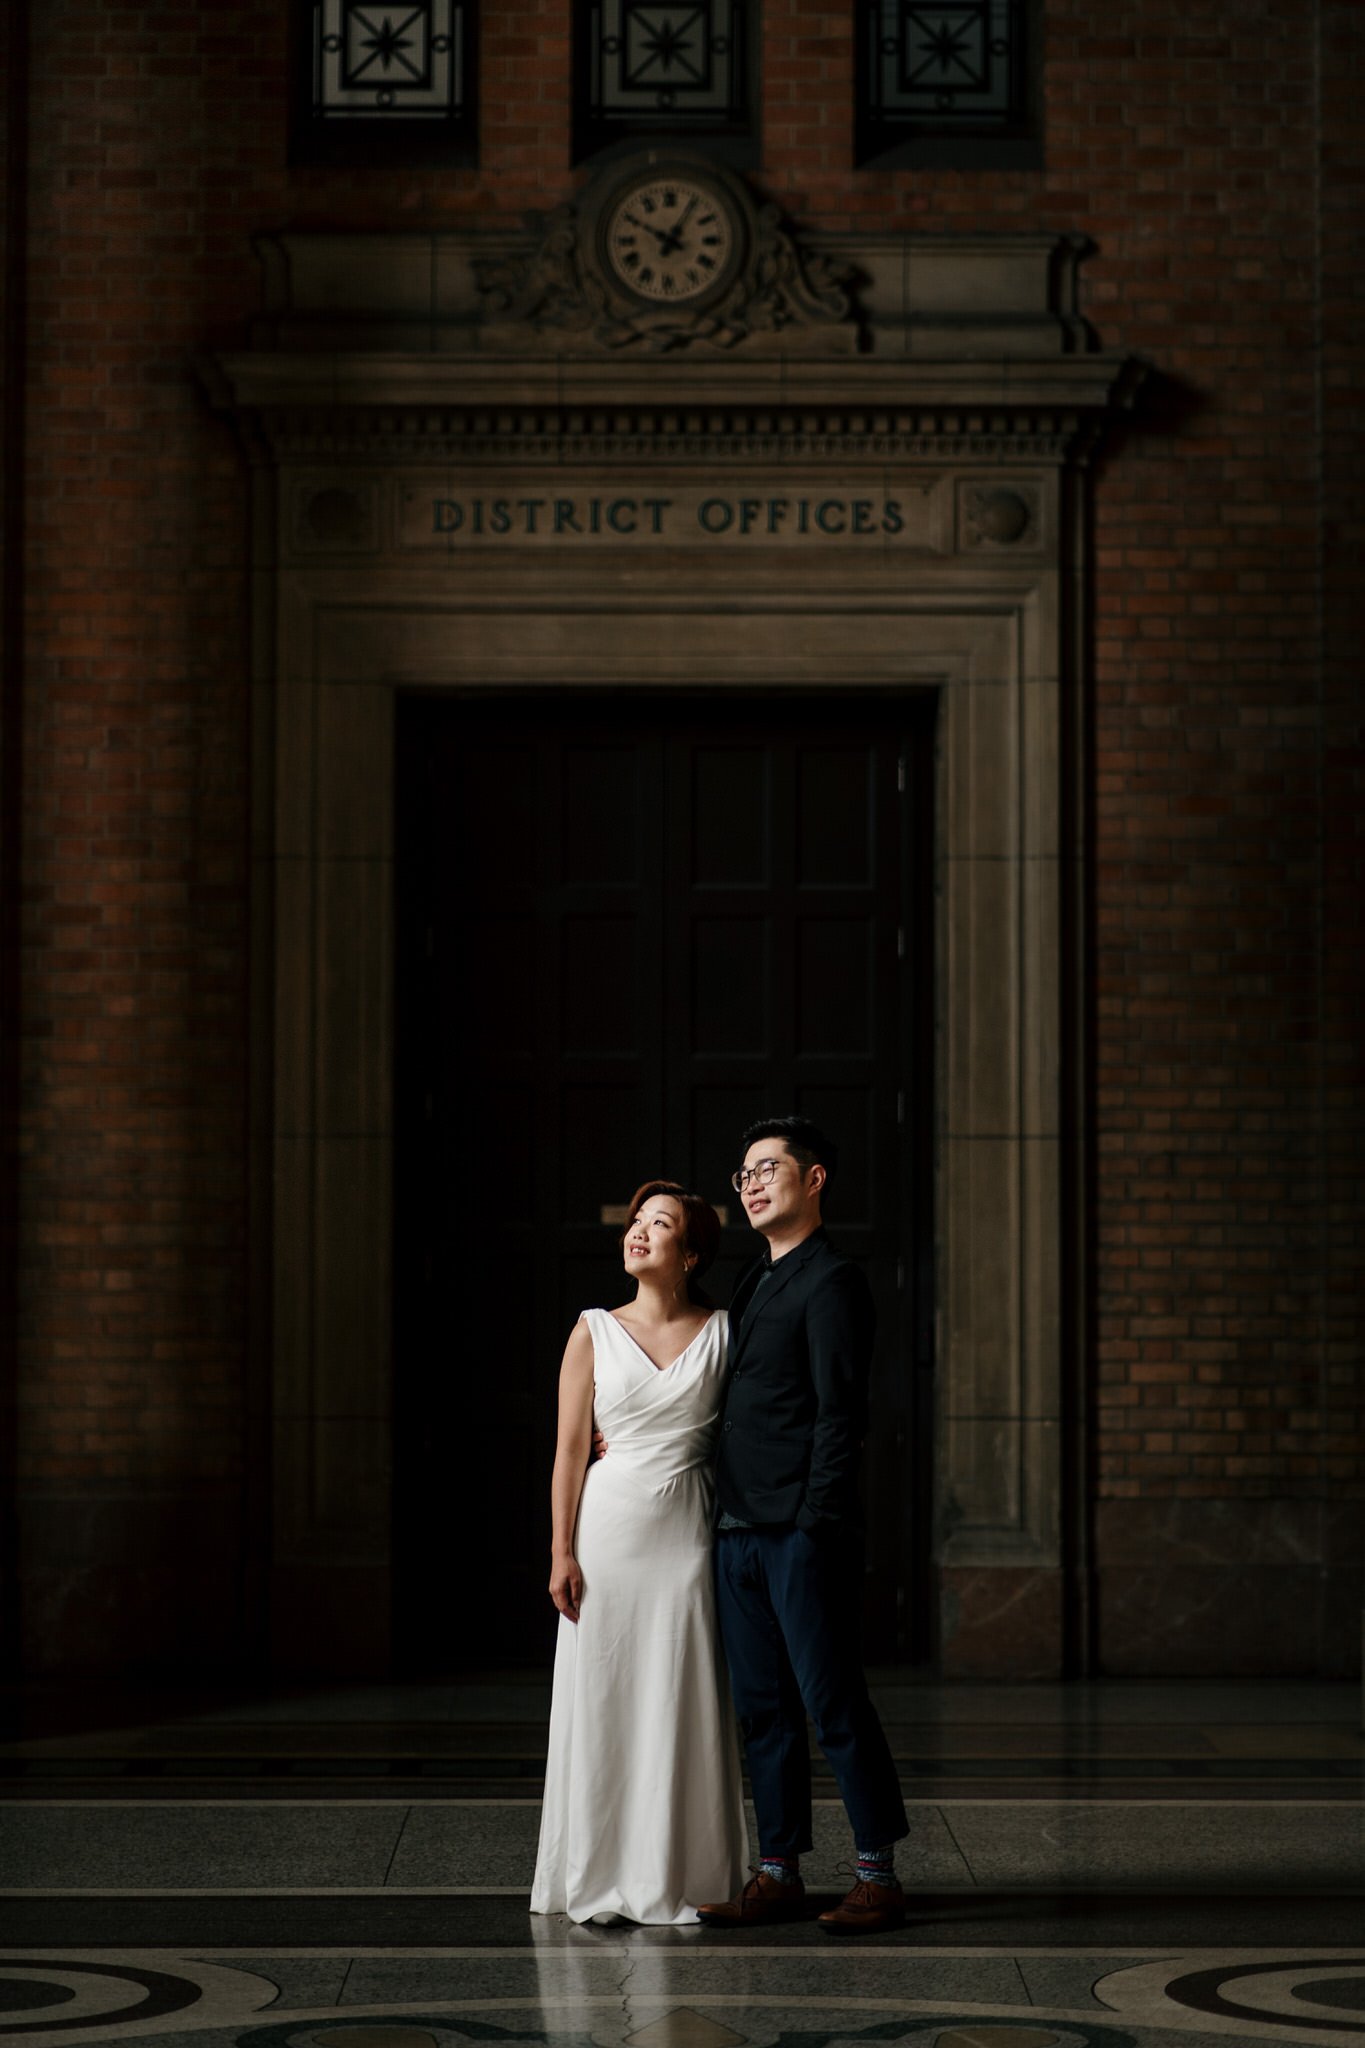 auckland-wedding-photographer-videographer-story-by-koo-koo's-jewelry-dear-white-productions-old-train-station-new-zealand-moody-historical-pre-wedding-engagement-photo (2).JPG